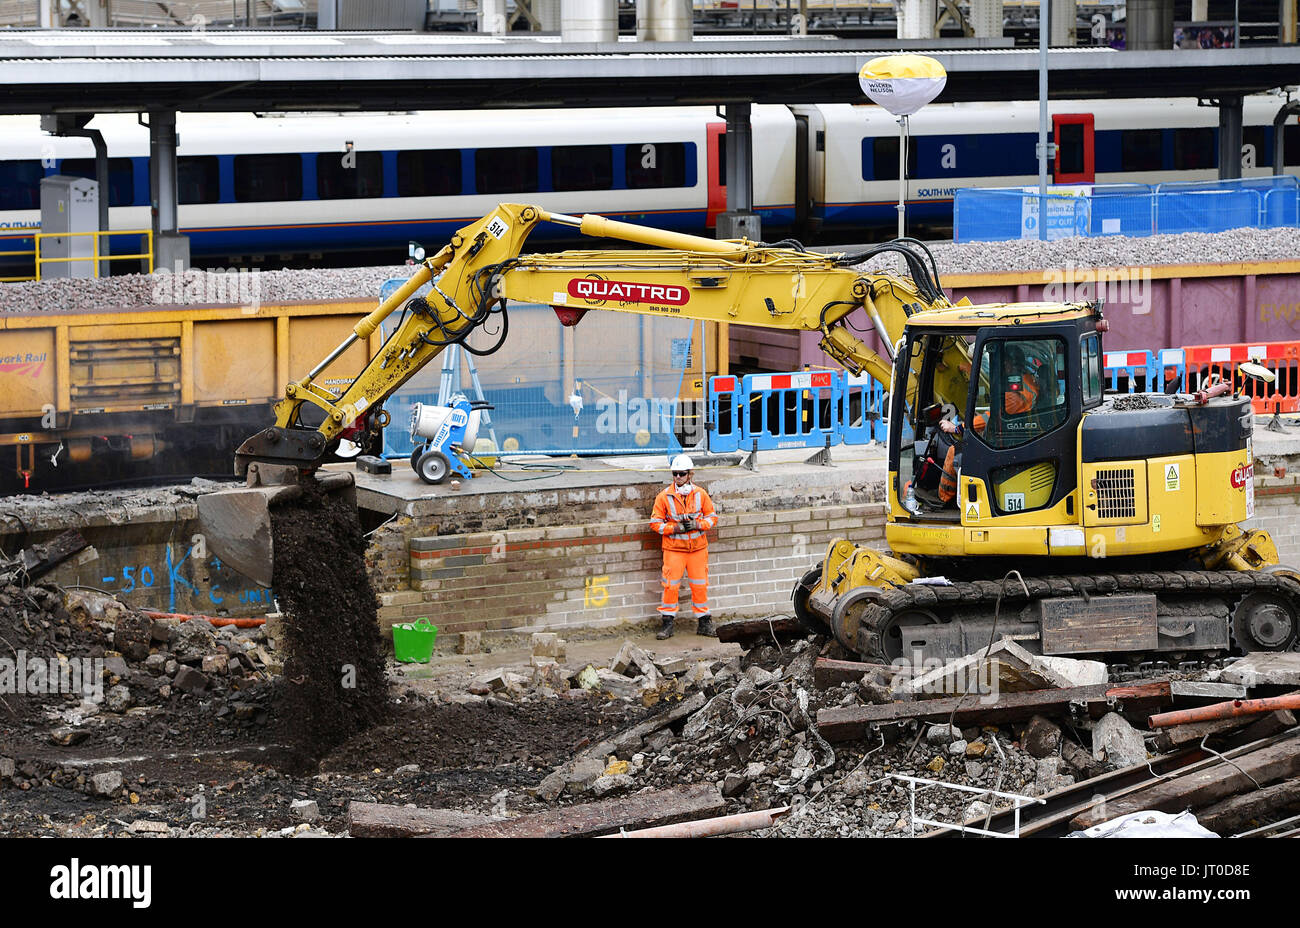 Engineering work continues at Waterloo Station in London in a major overhaul of the travel hub. Stock Photo